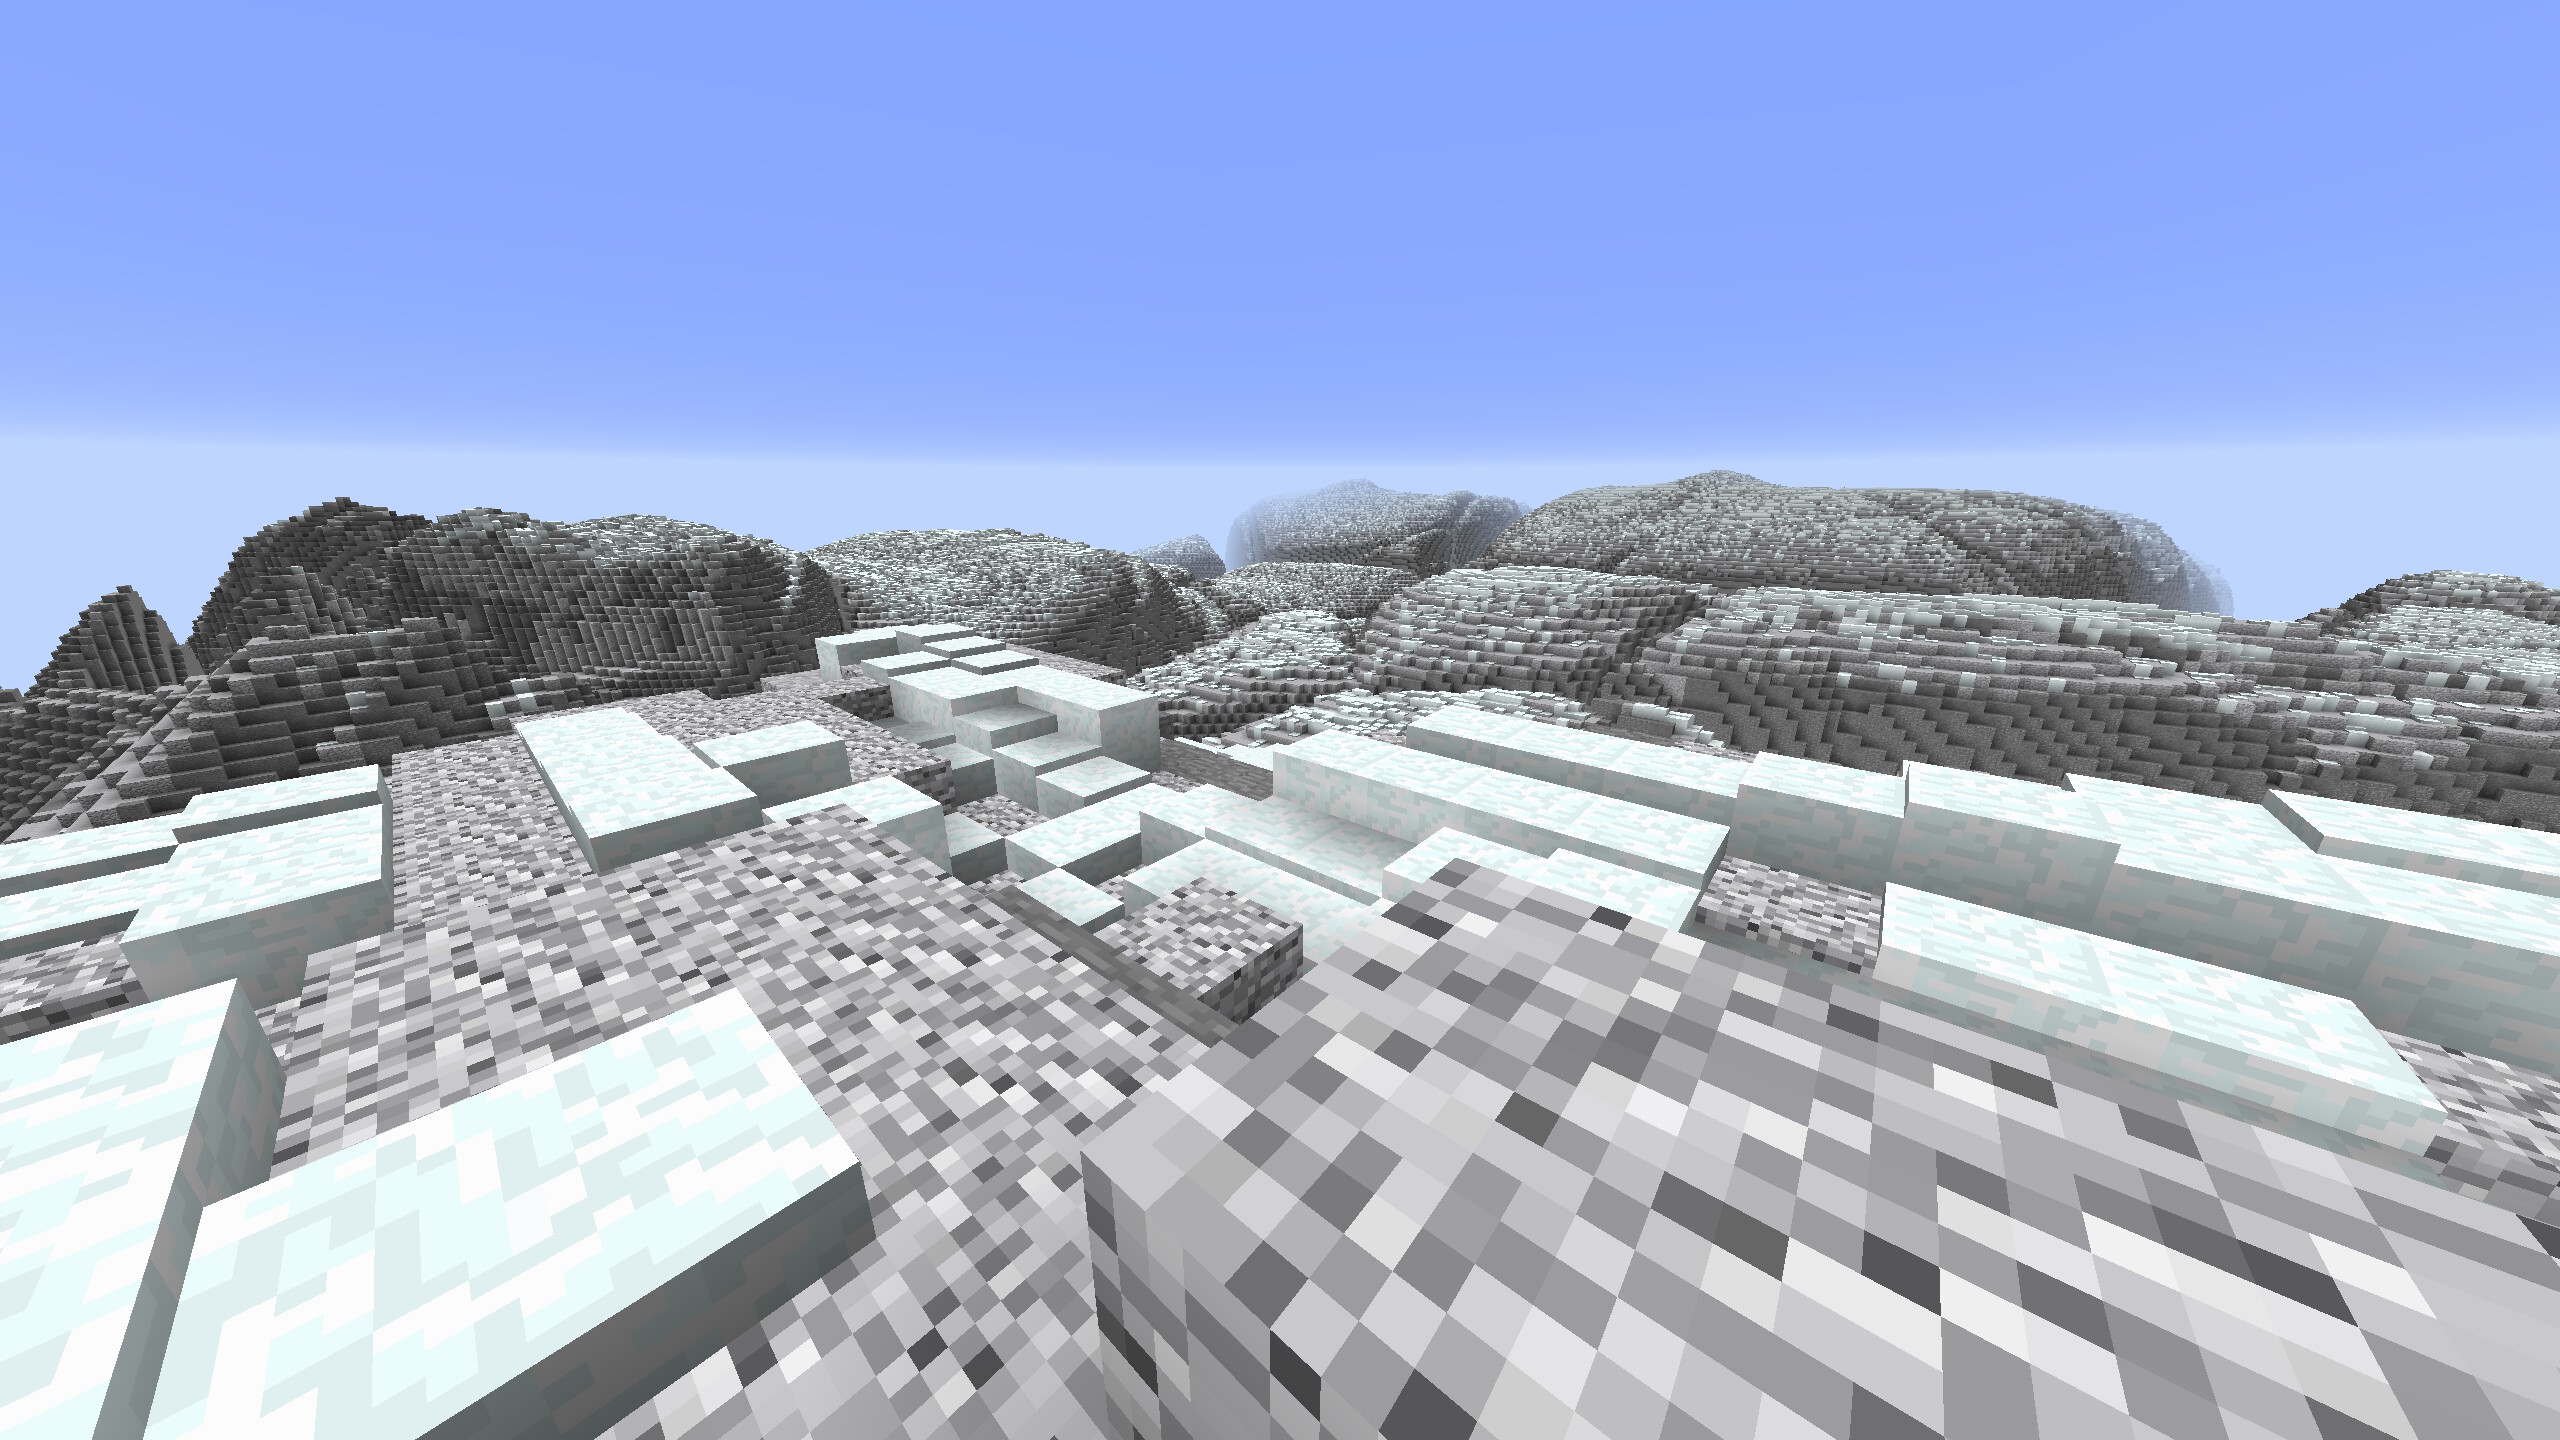 Here’s Another Wonderful Map To Play Minecraft On